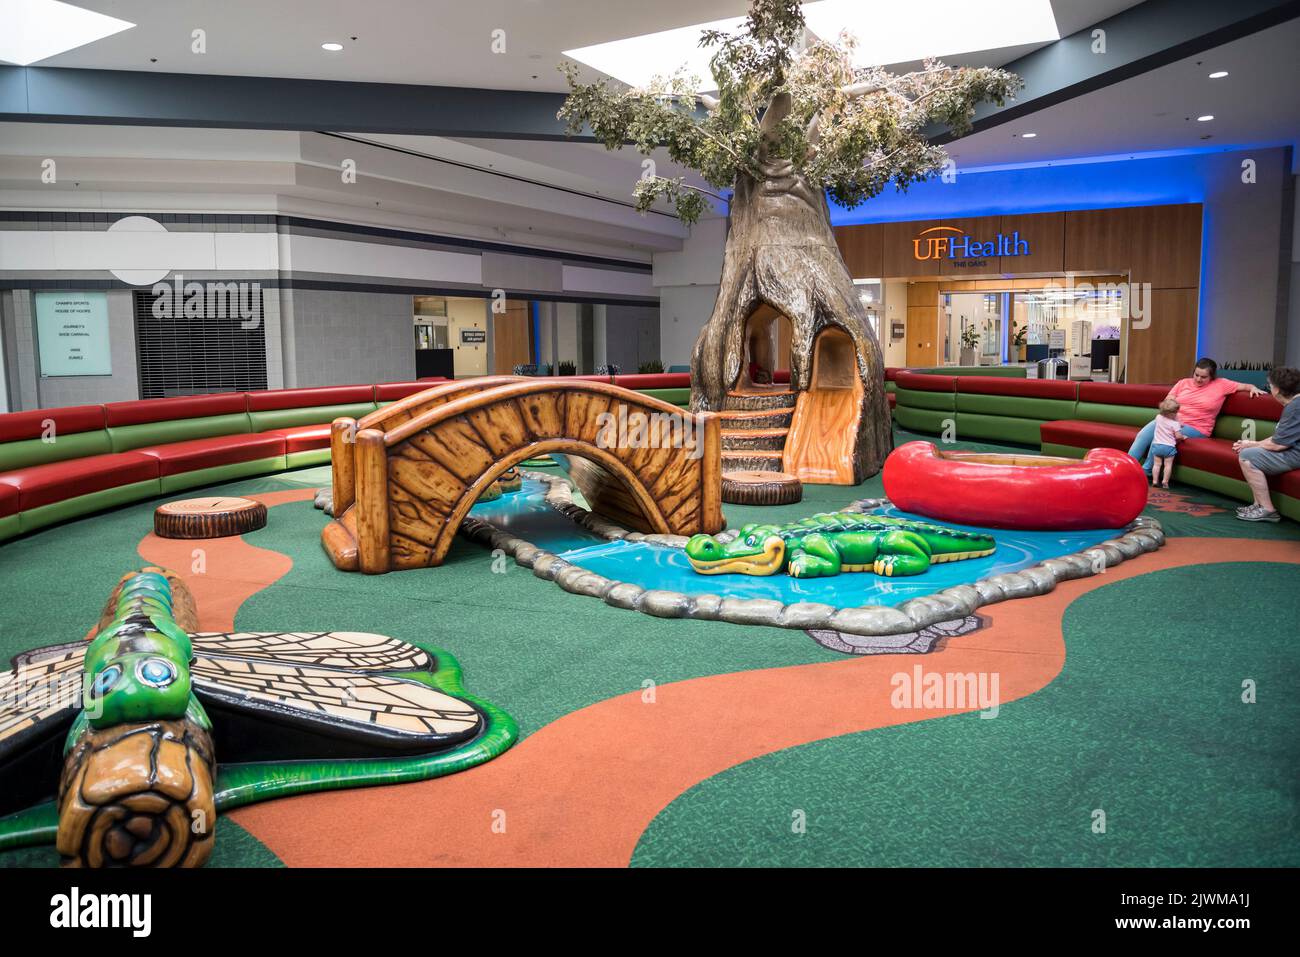 Play area for children inside a shopping mall in Gainesville, Florida. Stock Photo